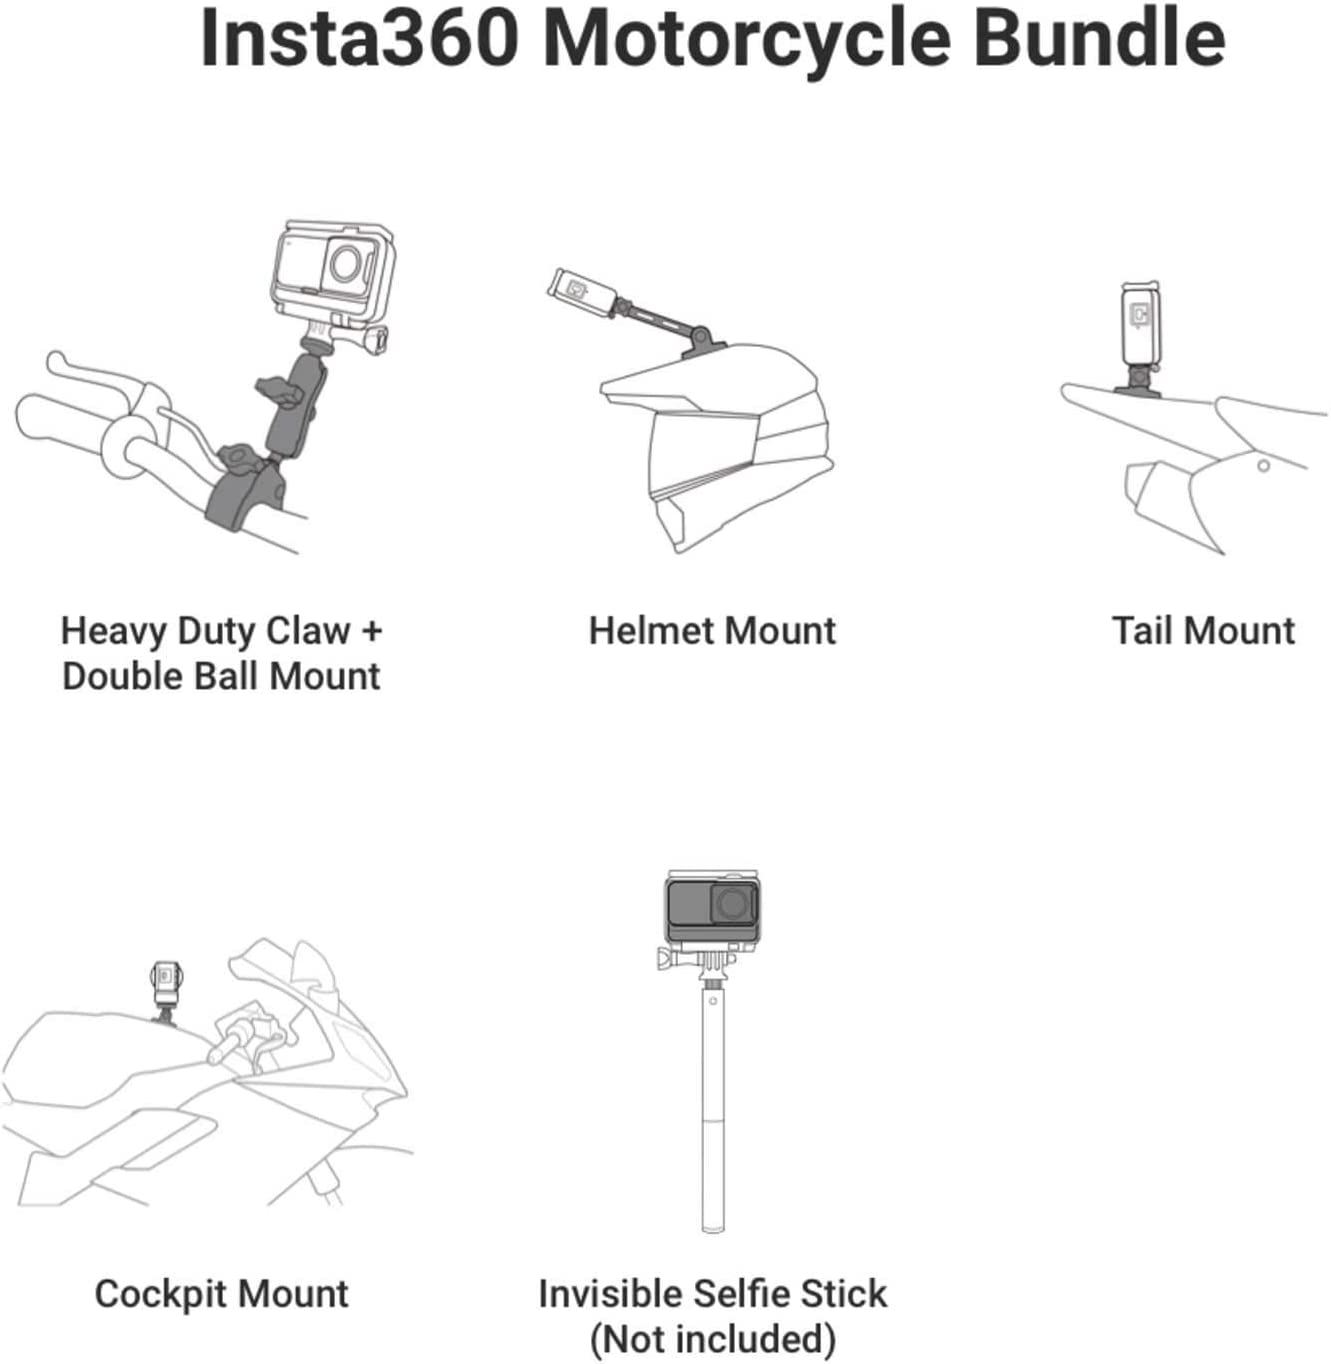 Motorcycle Len bundle, Insta360 with Invisible X3 stick, selfie camera